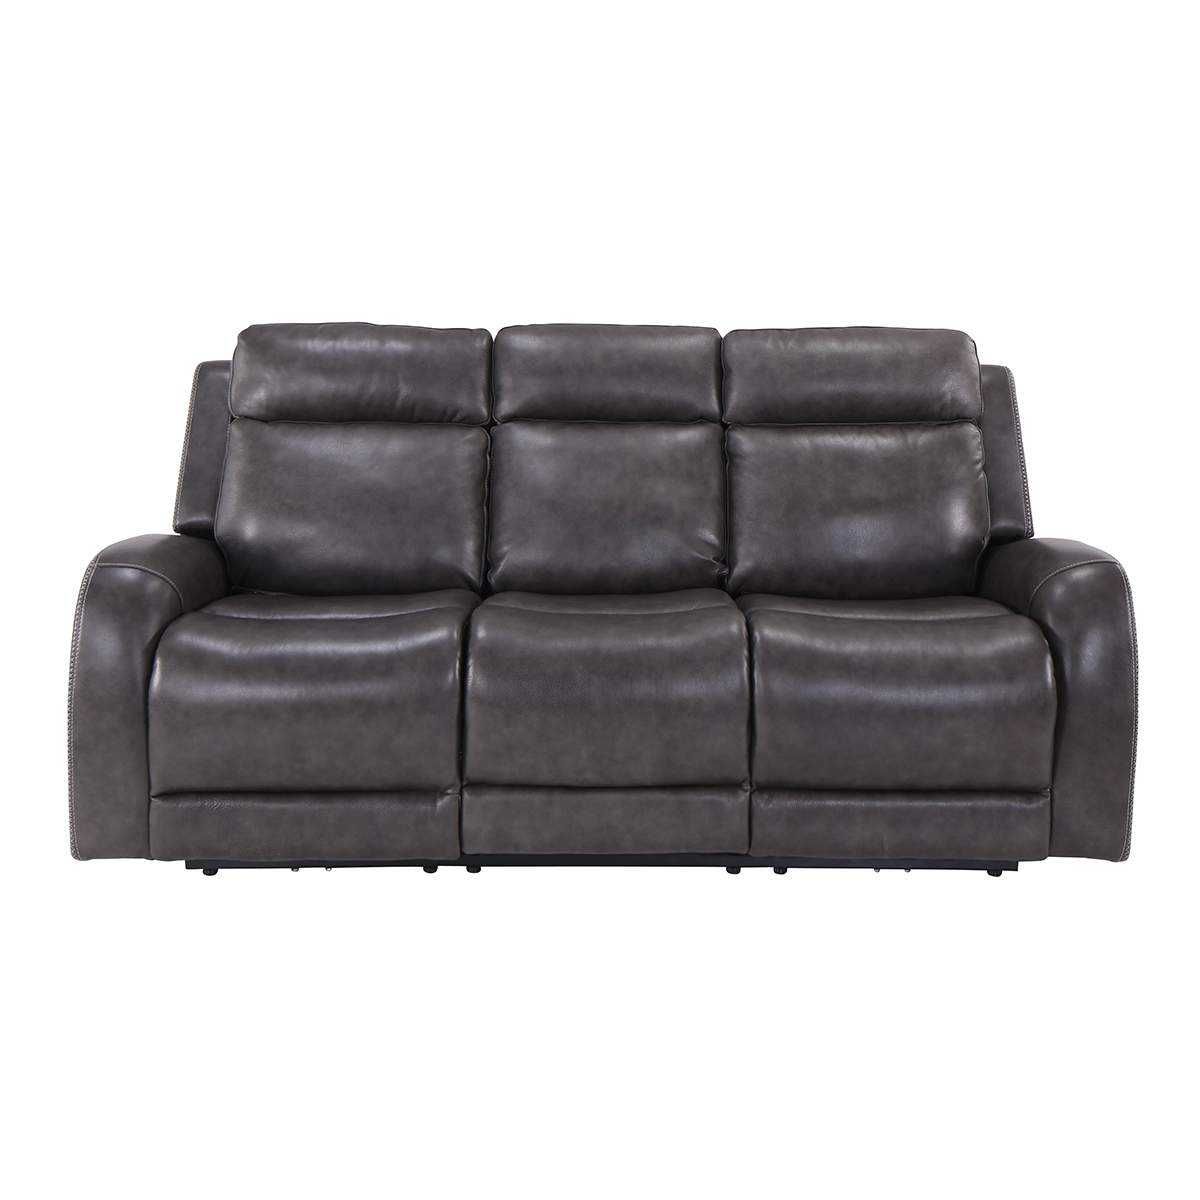 Power Reclining Leather Sofa Reviews – Latest Sofa Pictures With Regard To Marco Leather Power Reclining Sofas (View 11 of 15)